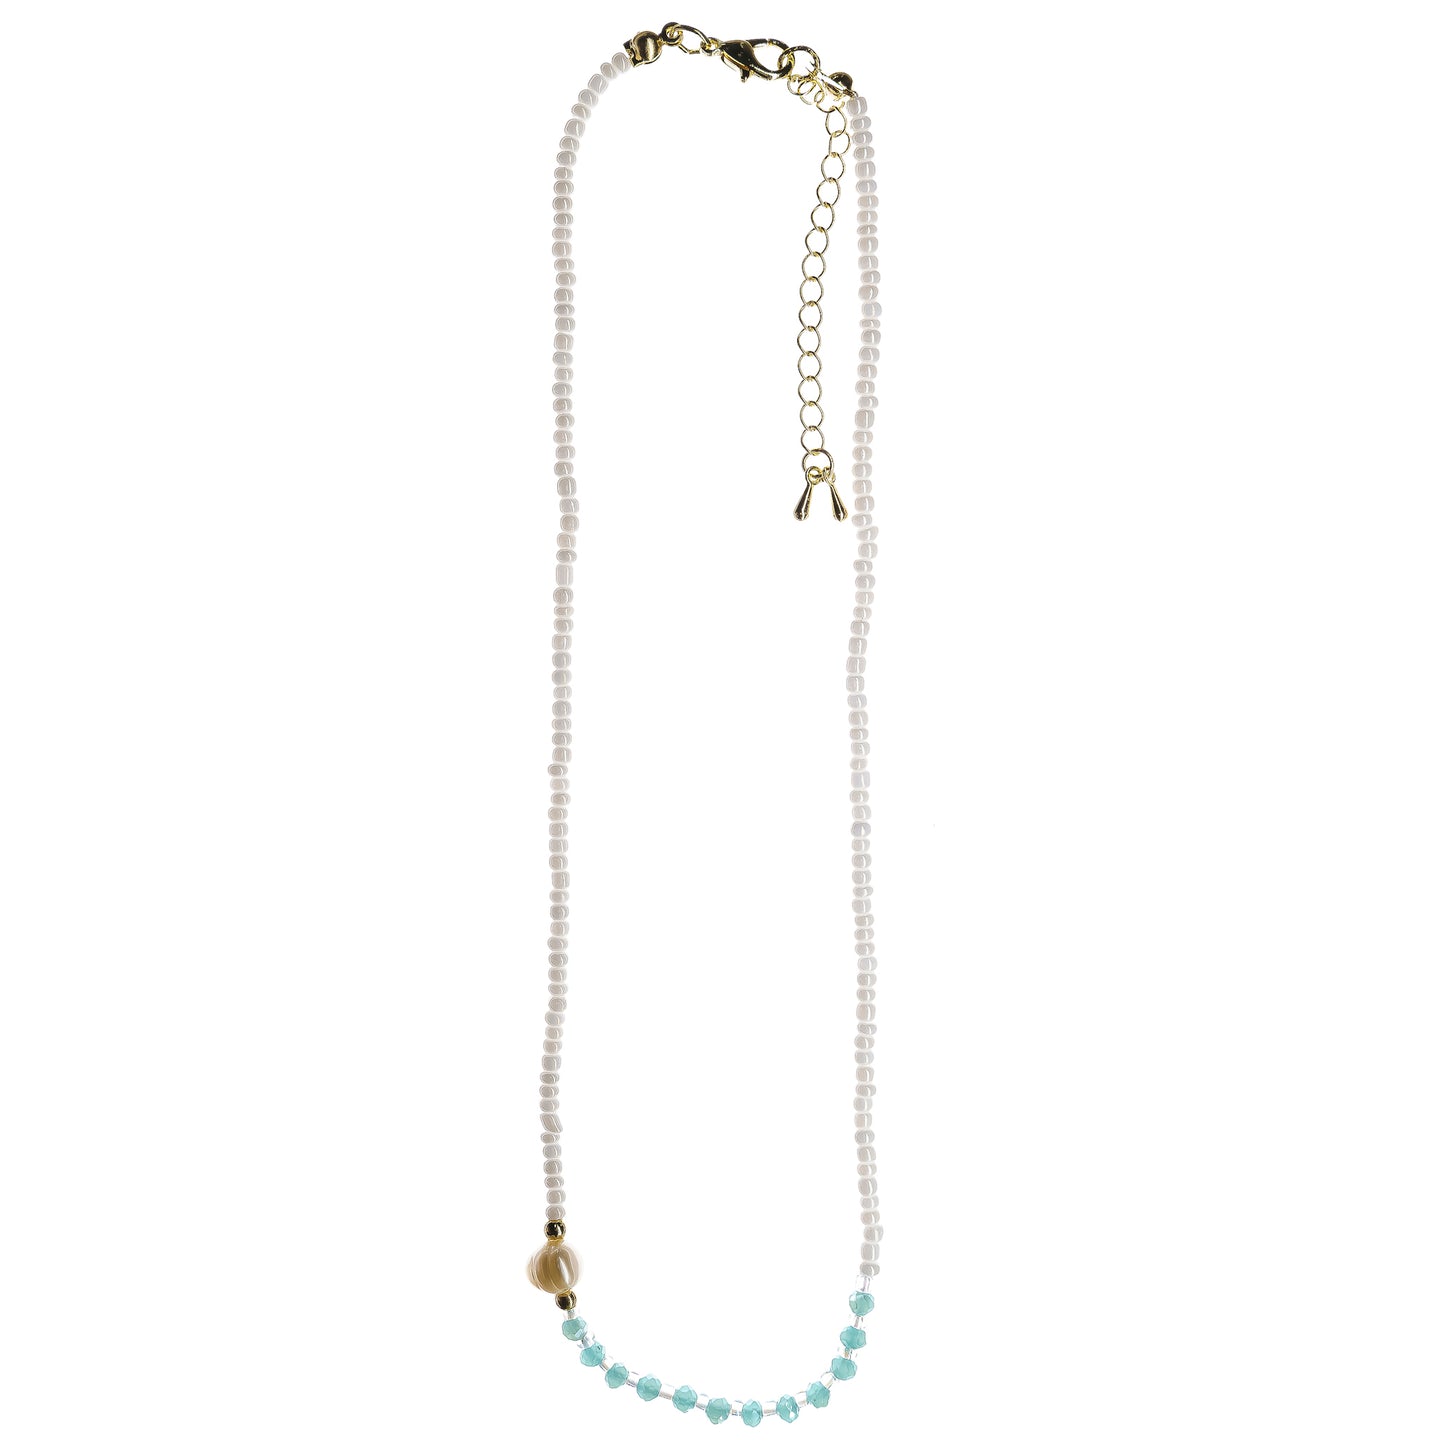 Faceted Beaded Pearl Necklace